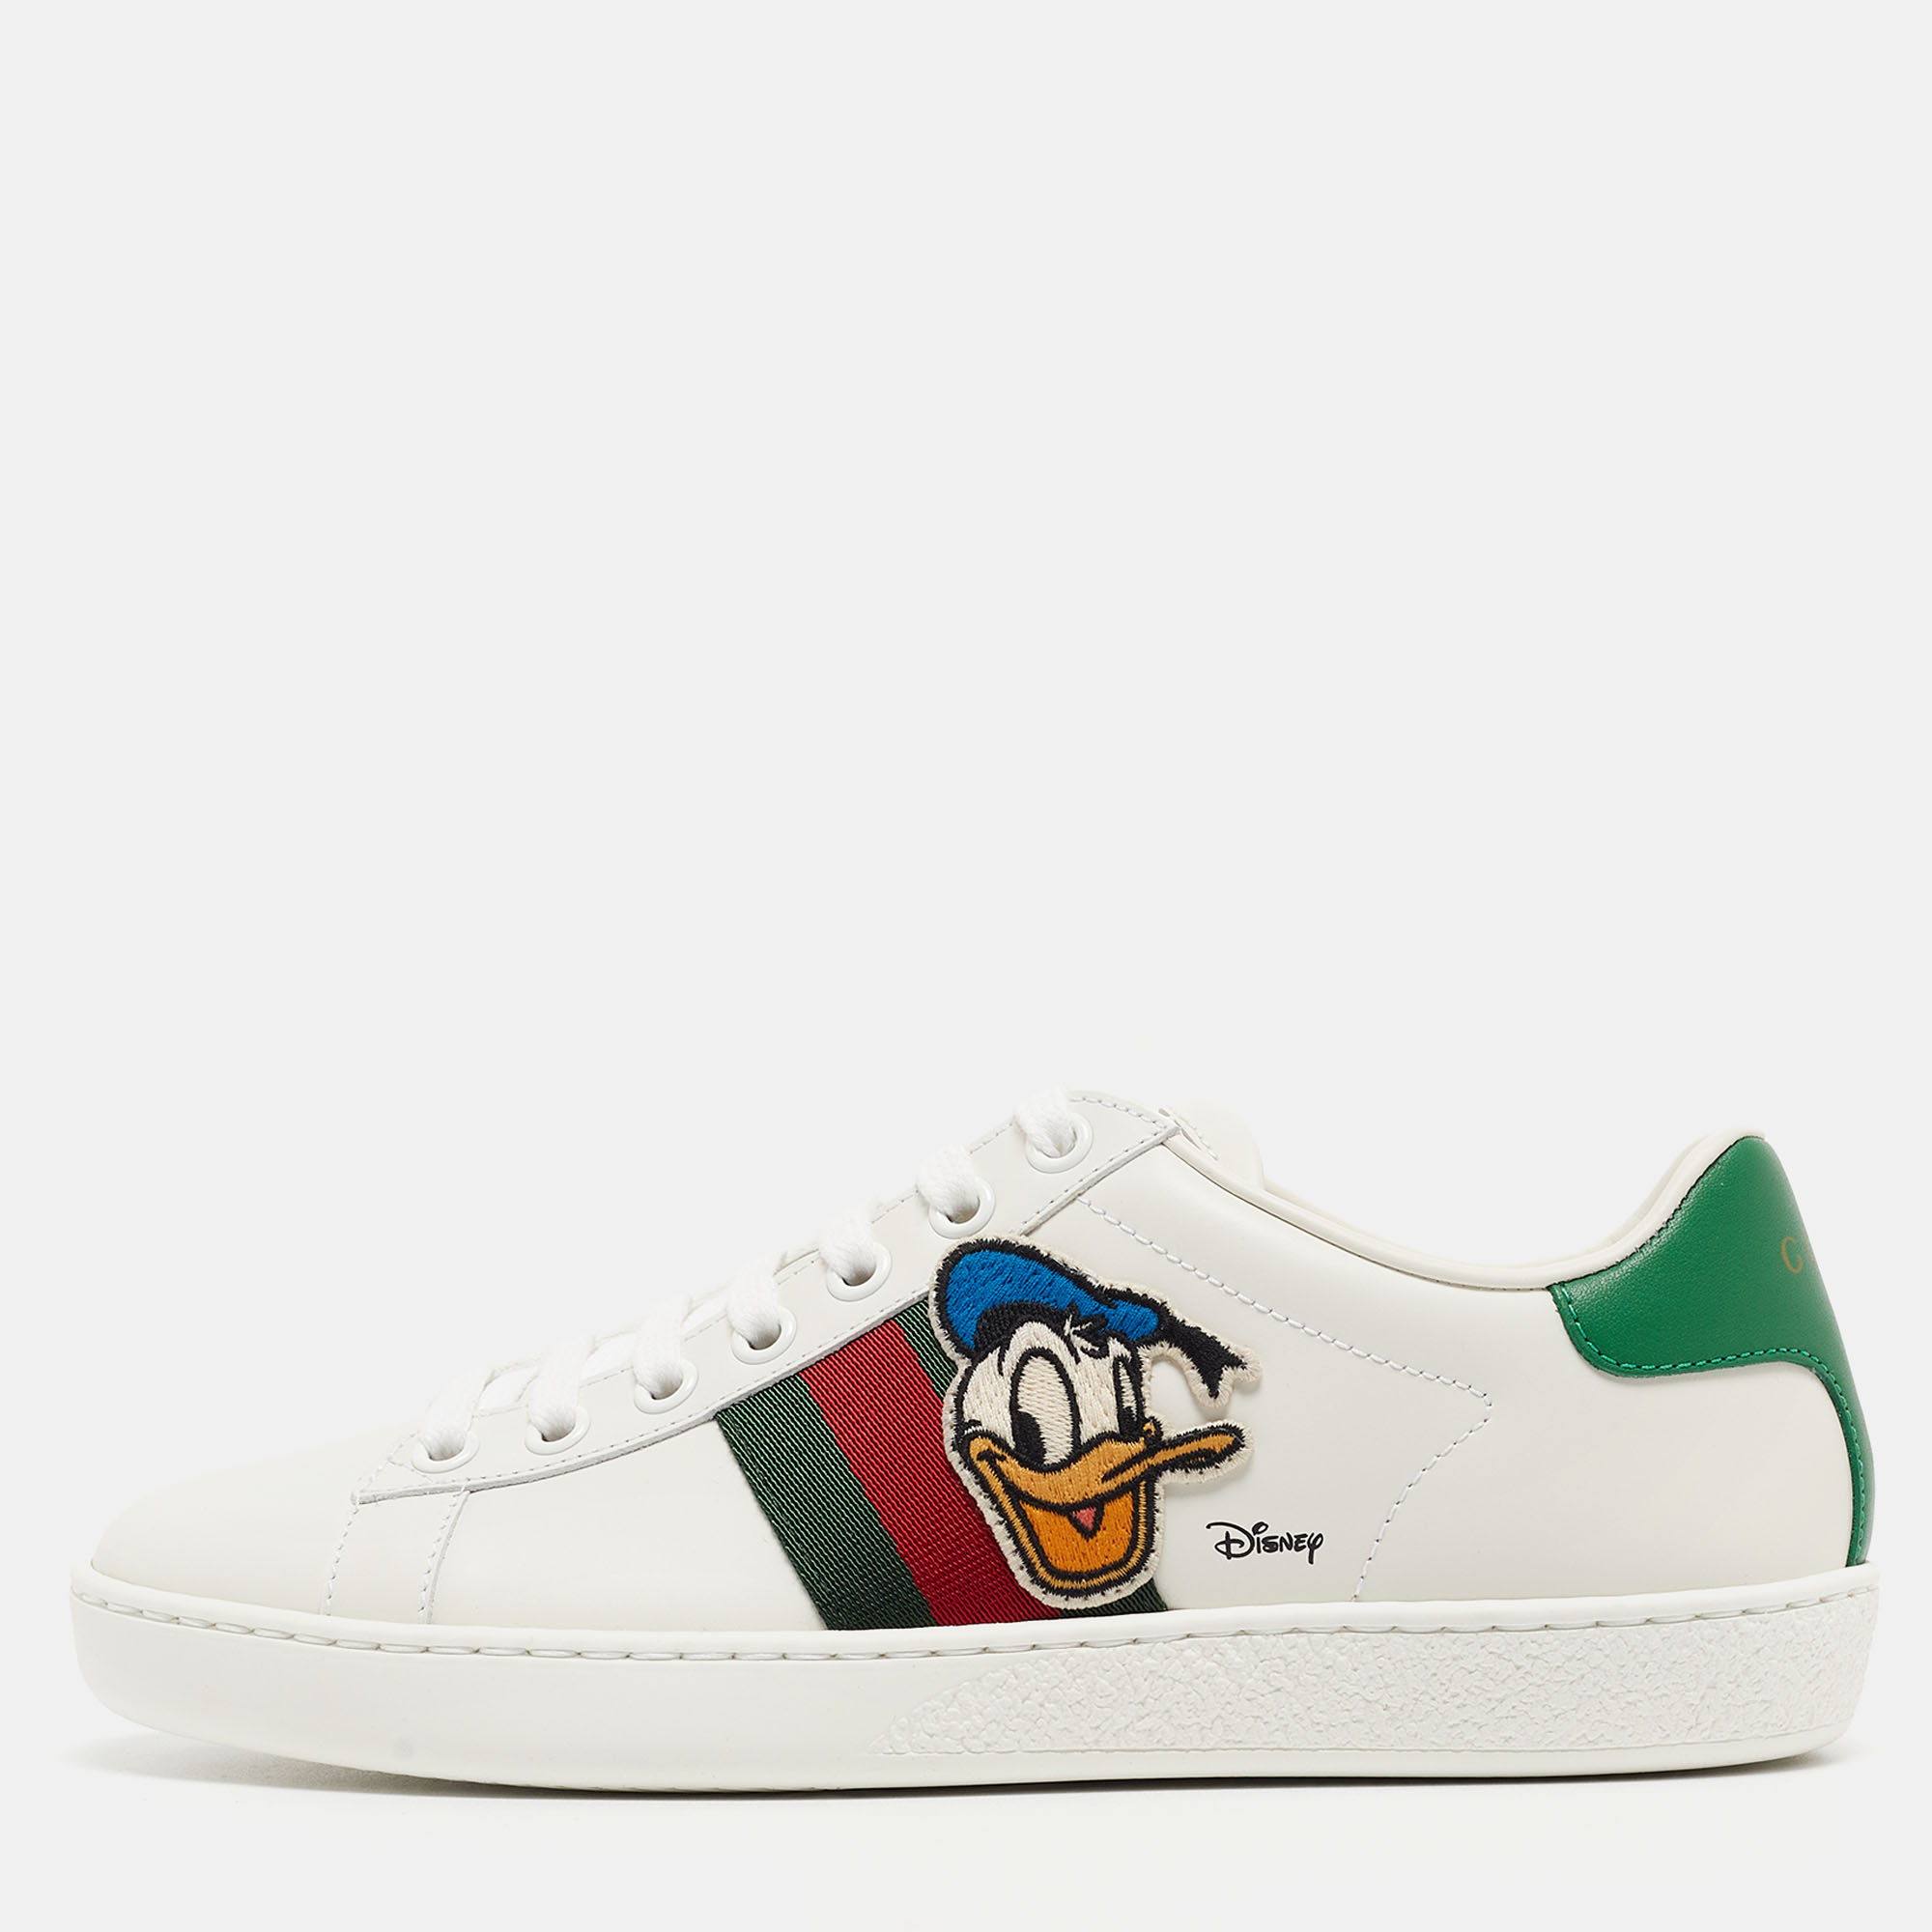 Coming in a classic silhouette these Gucci Ace sneakers are a seamless combination of luxury comfort and style. These sneakers are designed with signature details and comfortable insoles.